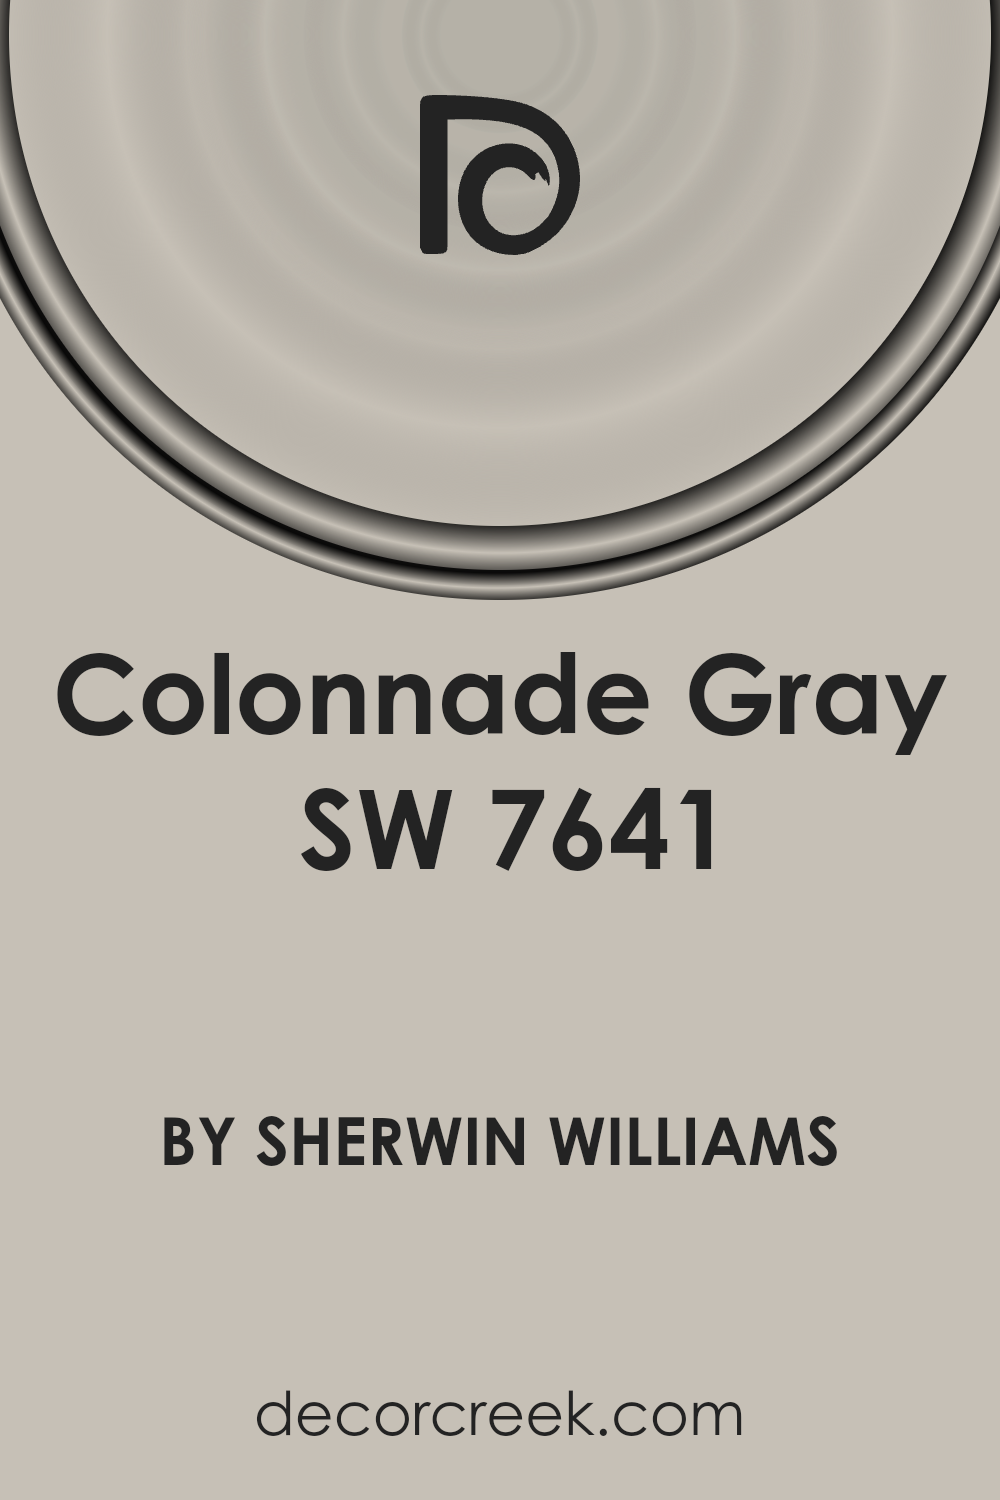 colonnade_gray_sw_7641_paint_color_by_sherwin_williams